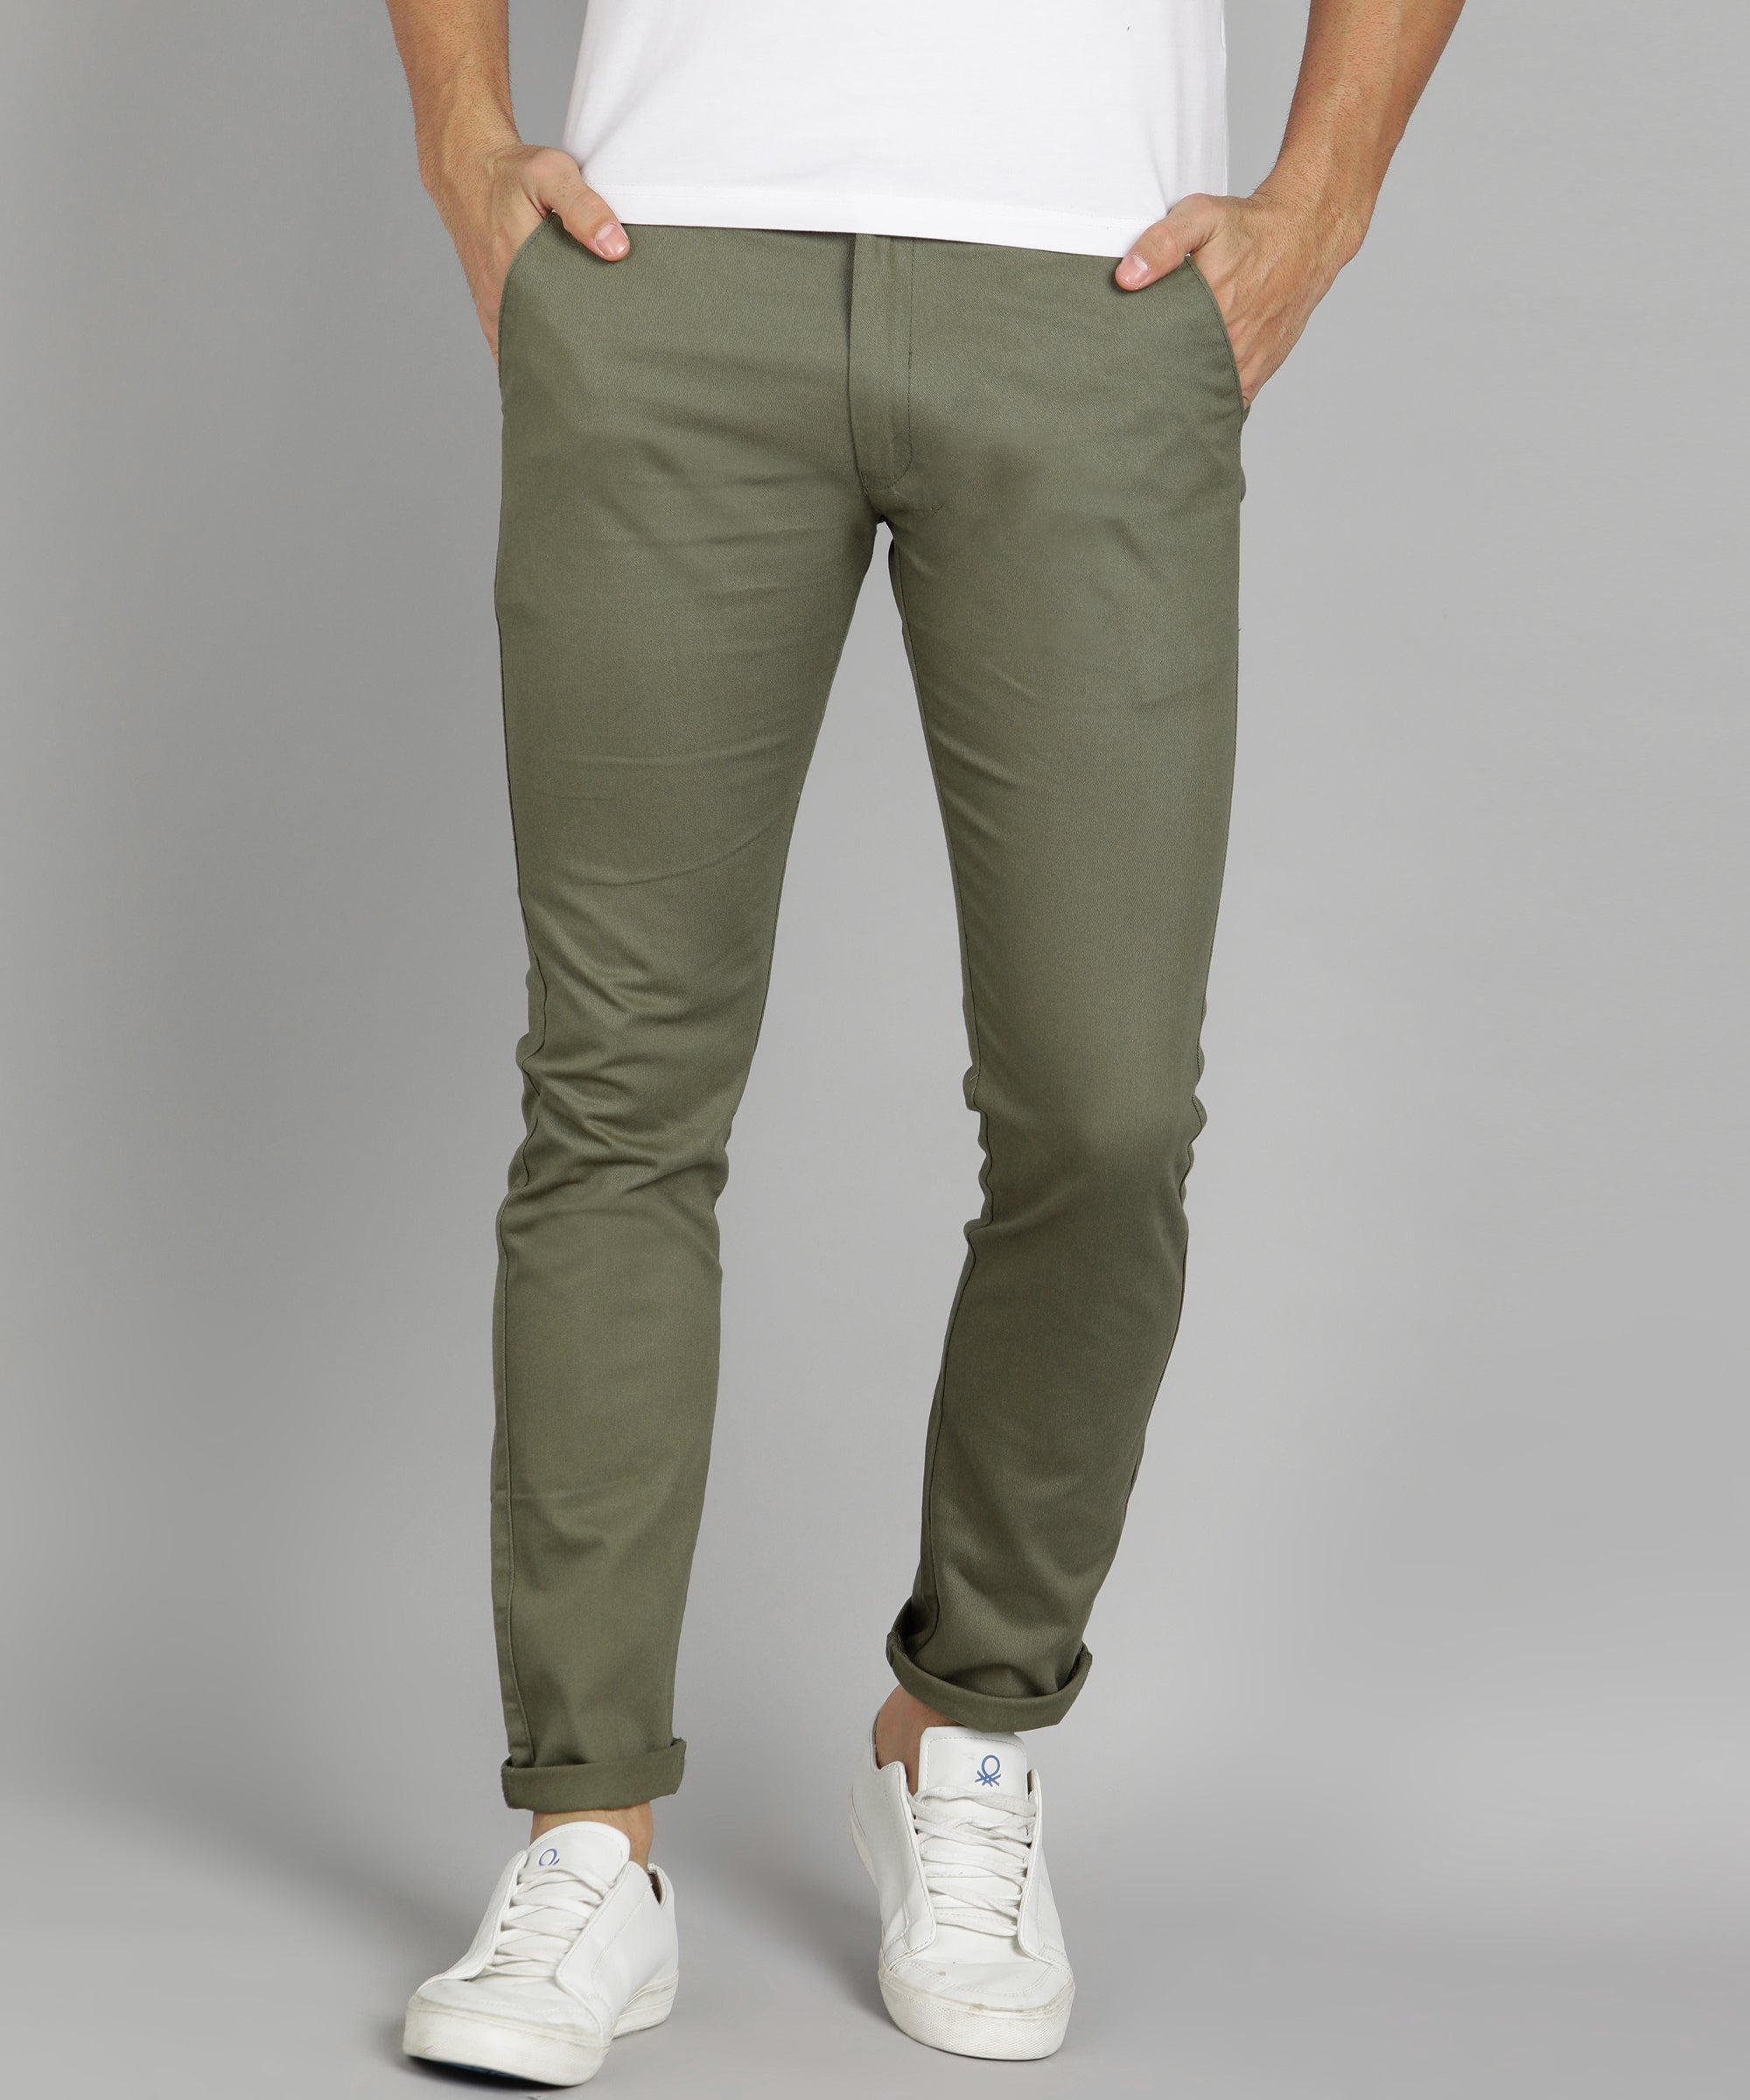 Men's Olive Green Cotton Slim Fit Casual Chinos Trousers Stretch